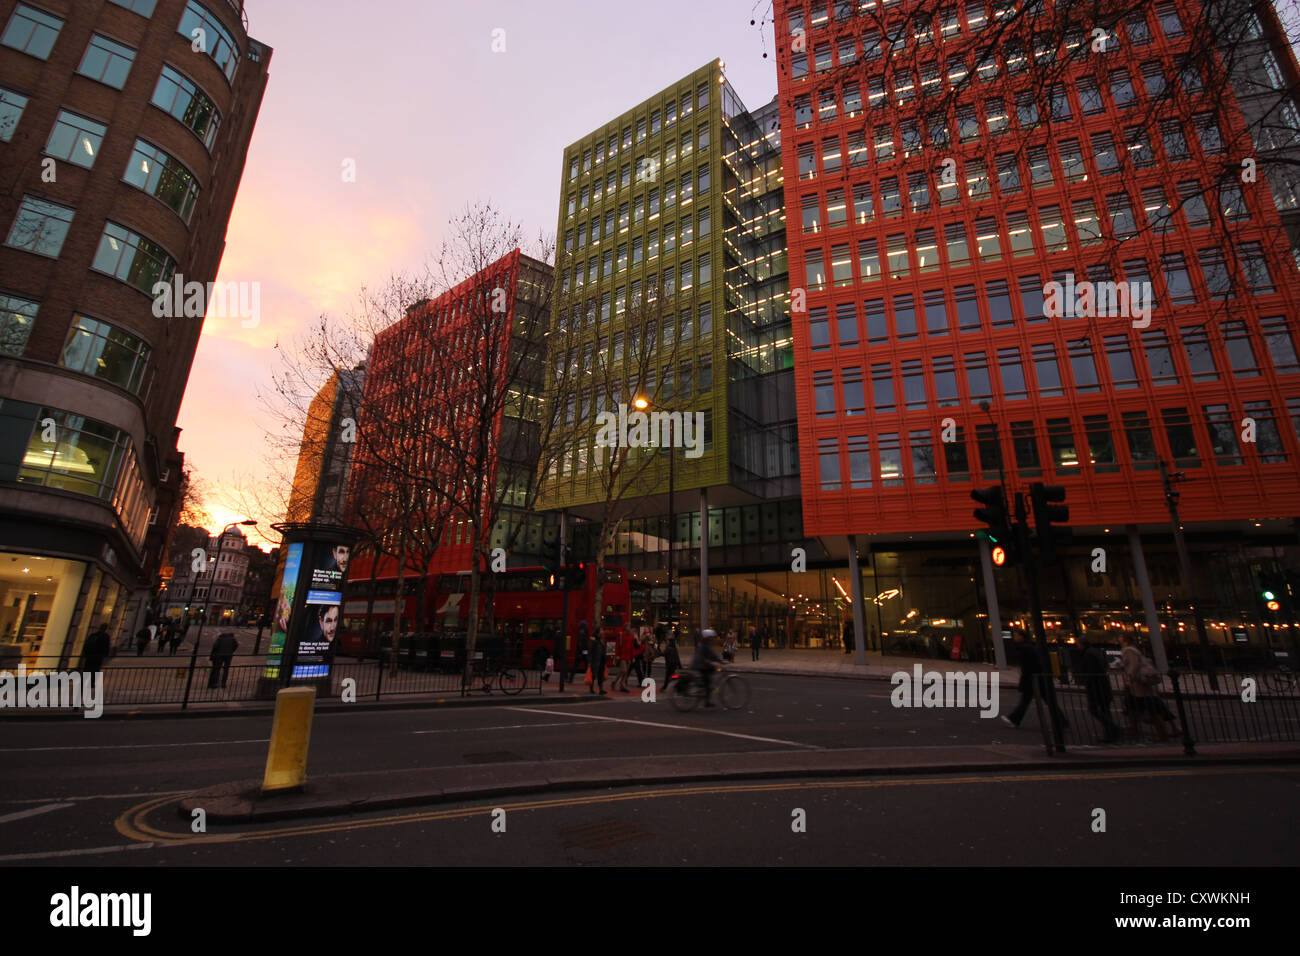 modern colorful Buildings at dusk in London's center, London, Londra, city, europe, Covent Garden Stock Photo